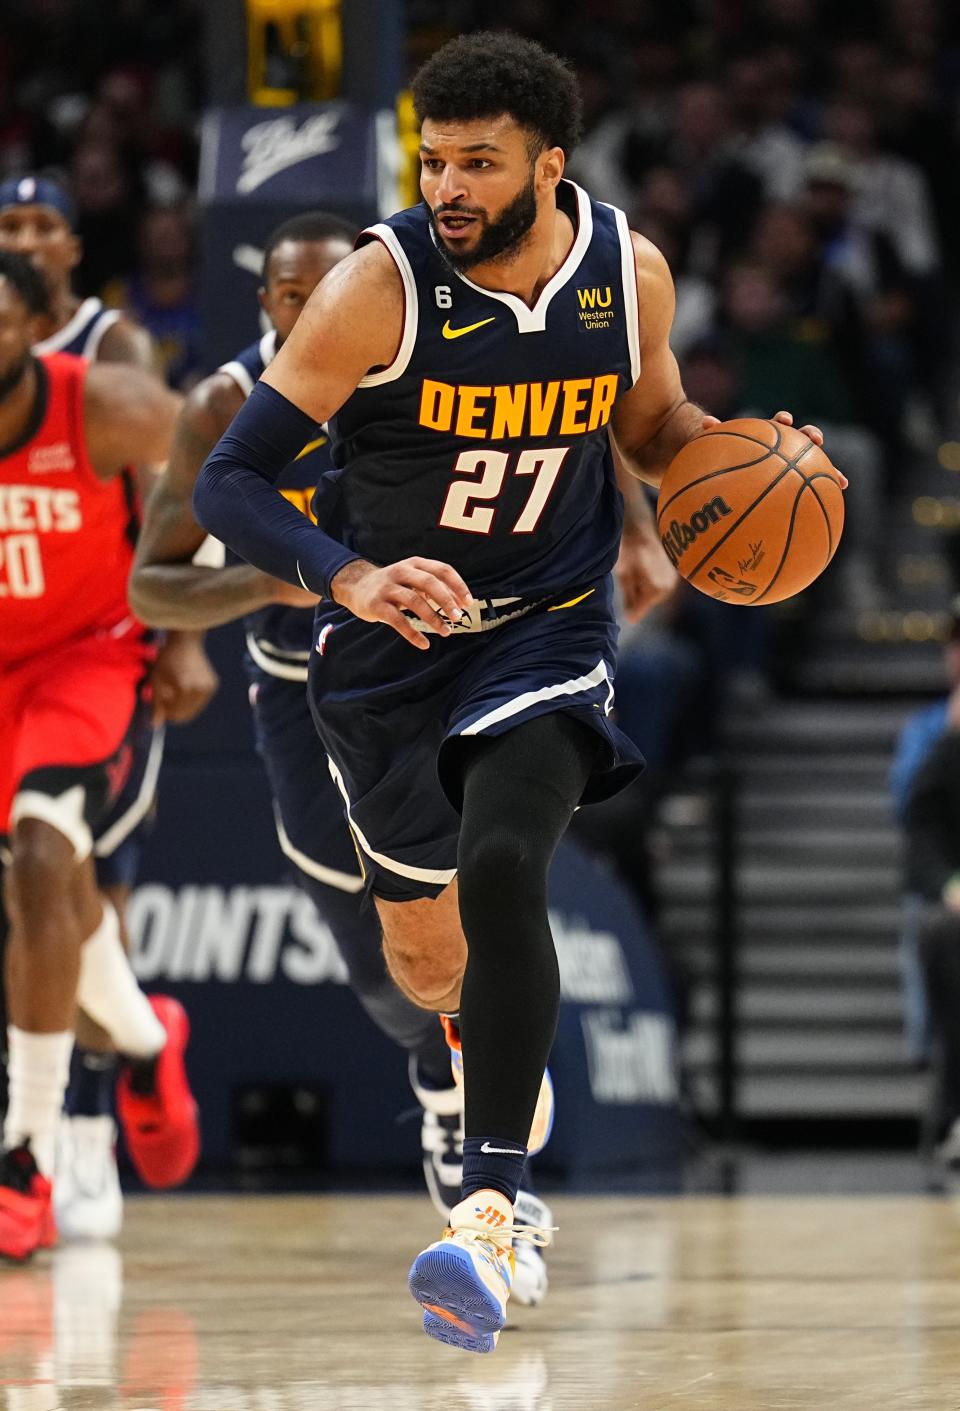 Denver Nuggets guard Jamal Murray brings the ball upcourt against the Houston Rockets during the third quarter of an NBA basketball game, Monday, Nov. 28, 2022, in Denver. (AP Photo/Jack Dempsey)